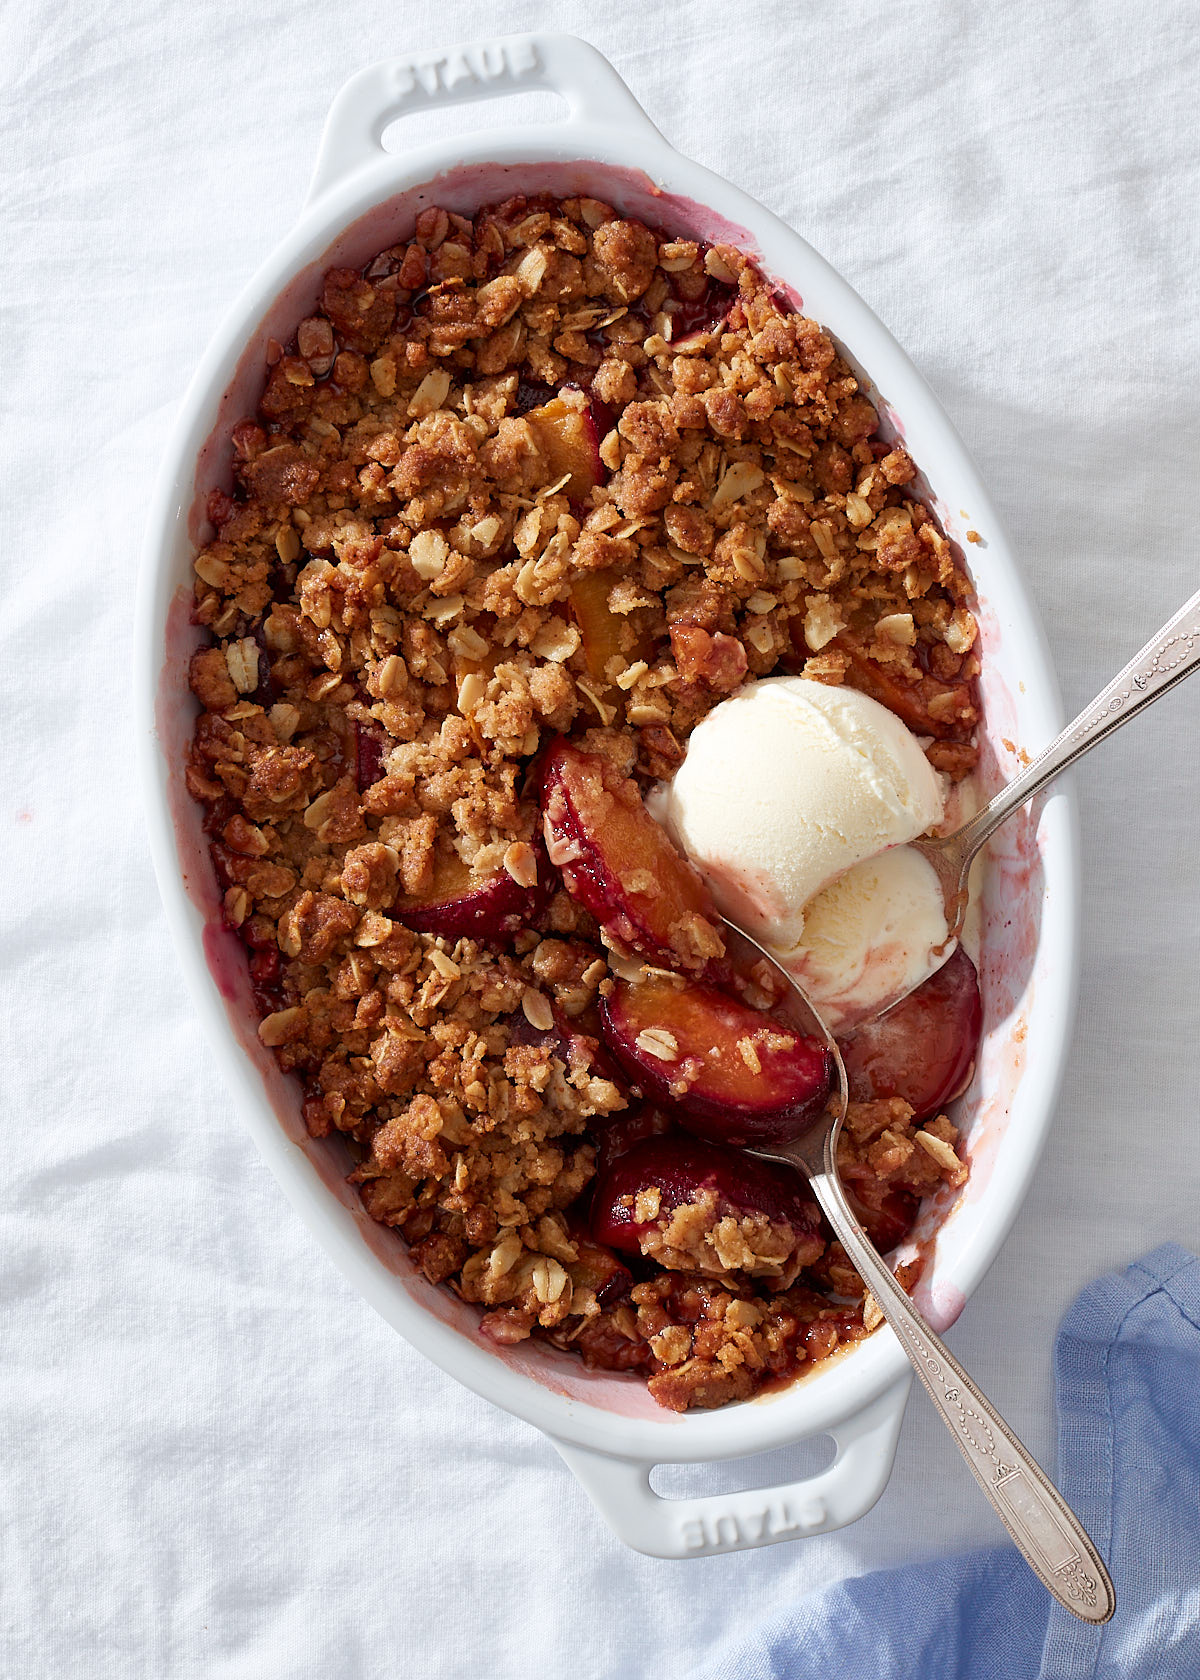 A plum crumble in a white baking dish with two vintage silver spoons and a scoop of vanilla ice cream.